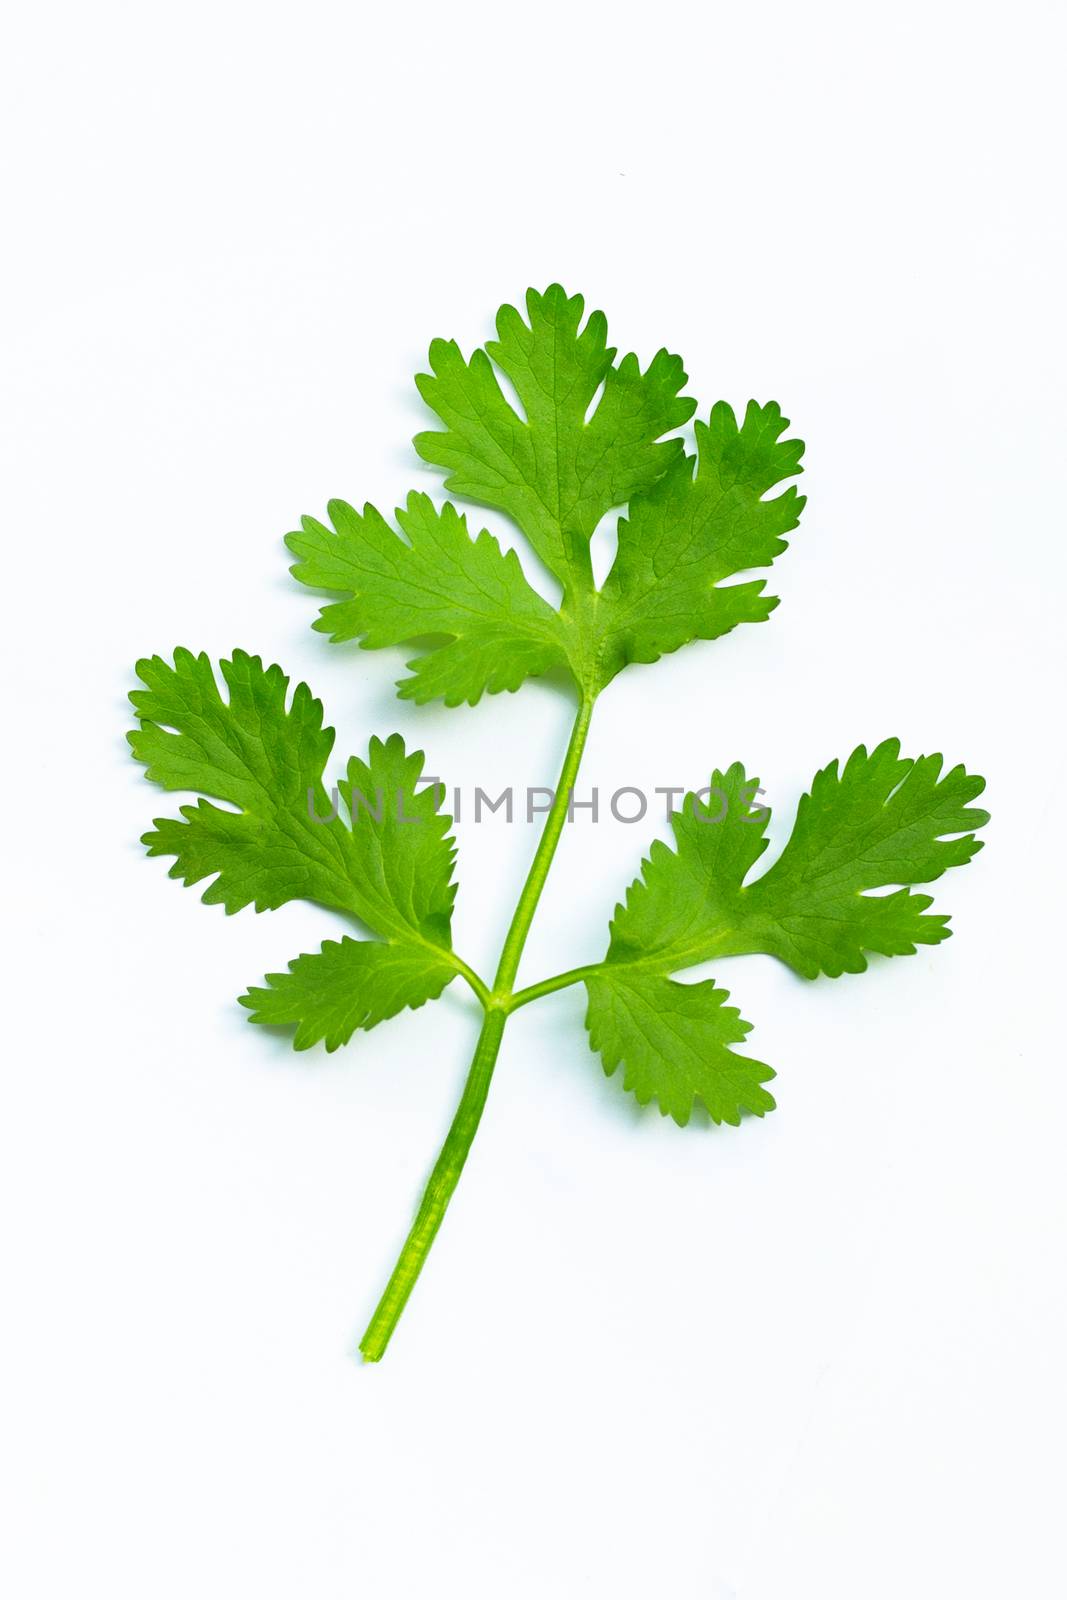 Fresh coriander leaves on a white background.